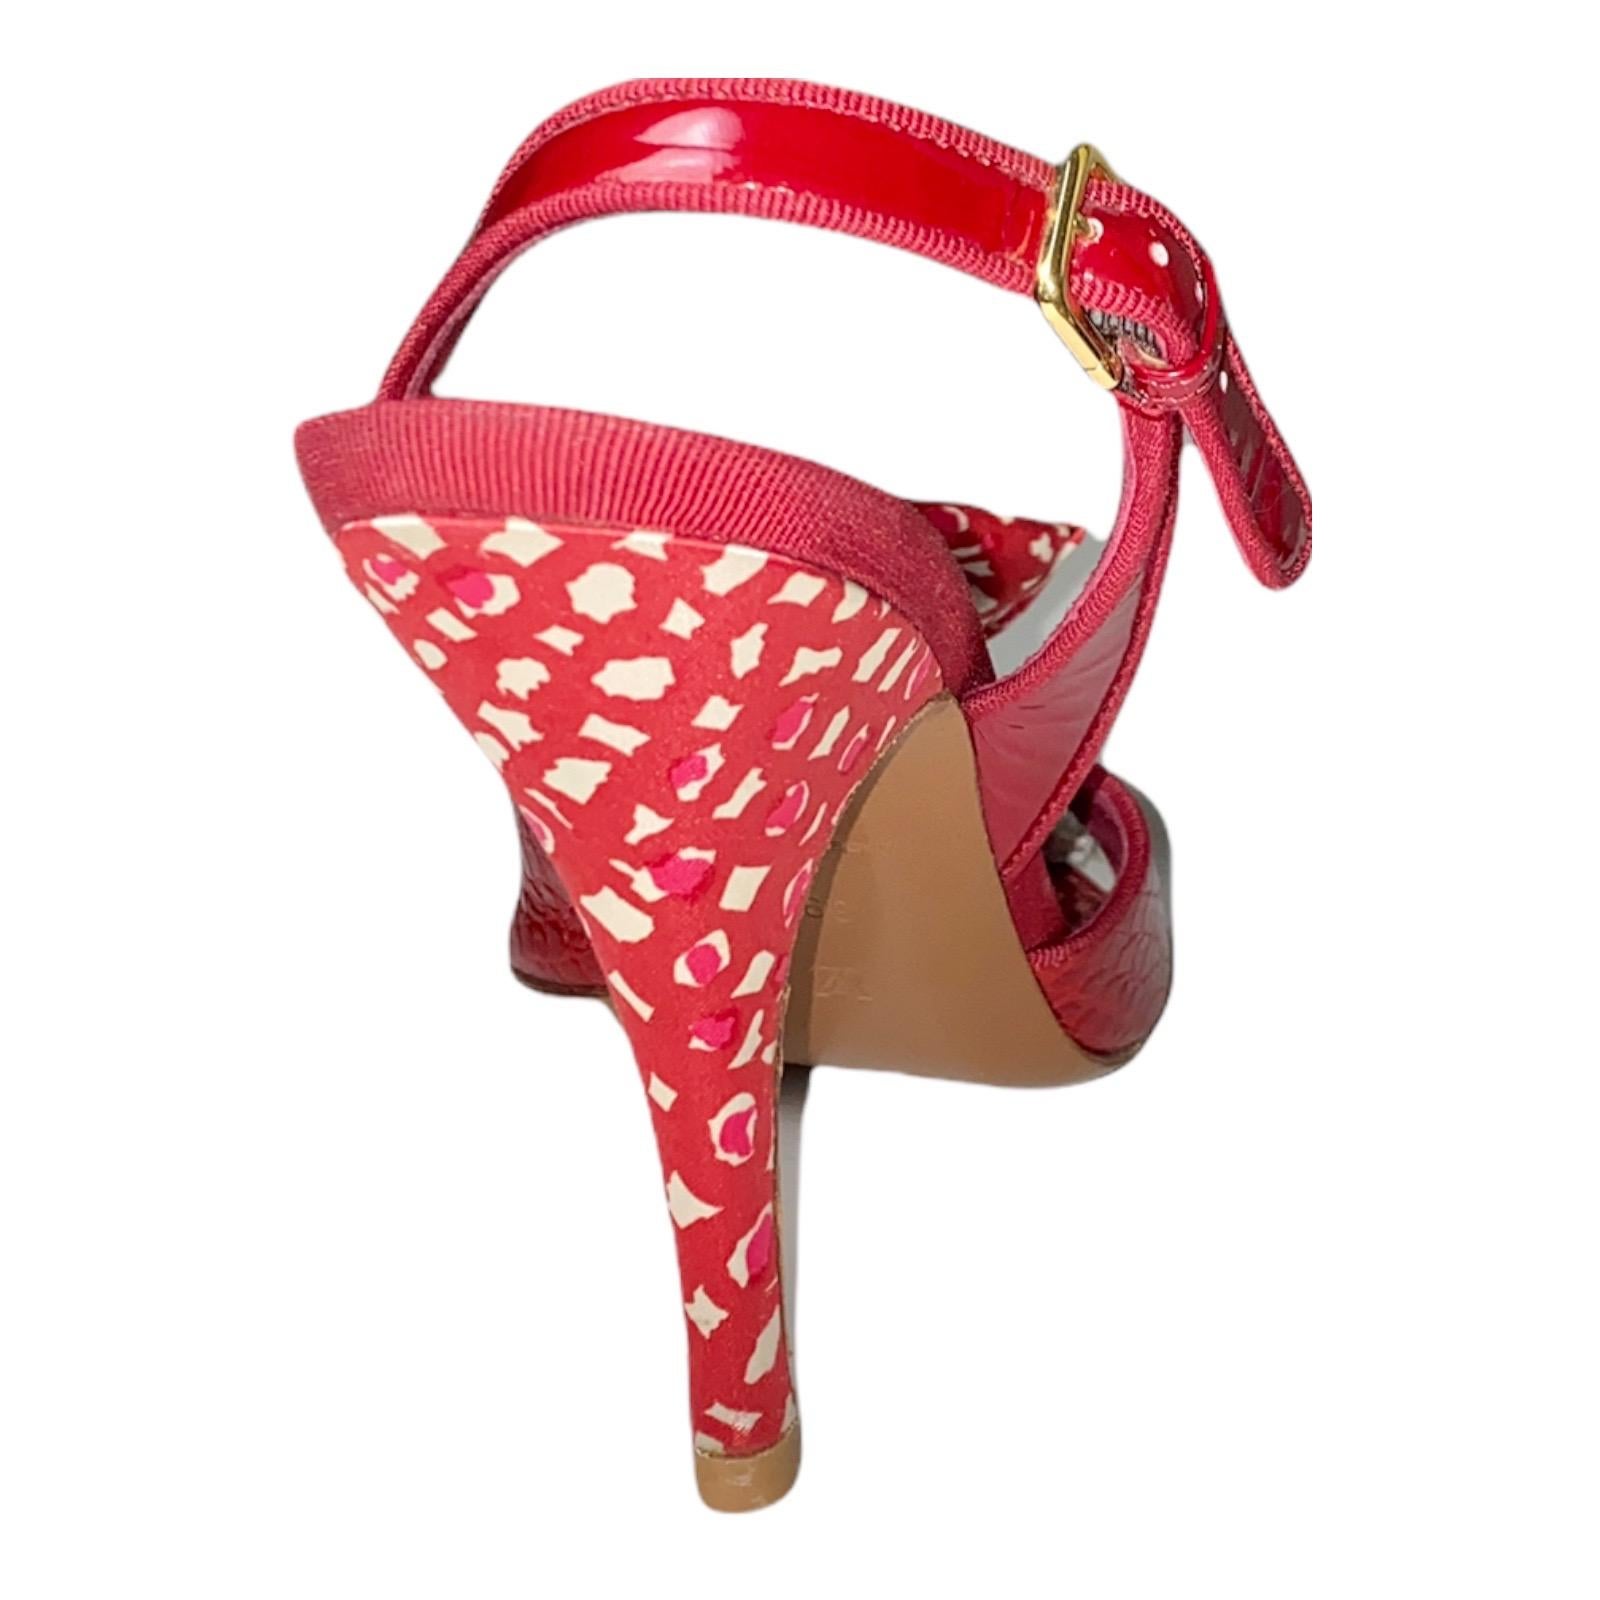 LOUIS VUITTON Red Satin Bow Exotic Peep Toe High Heel Sandals Lock Plate 39 In Good Condition For Sale In Switzerland, CH